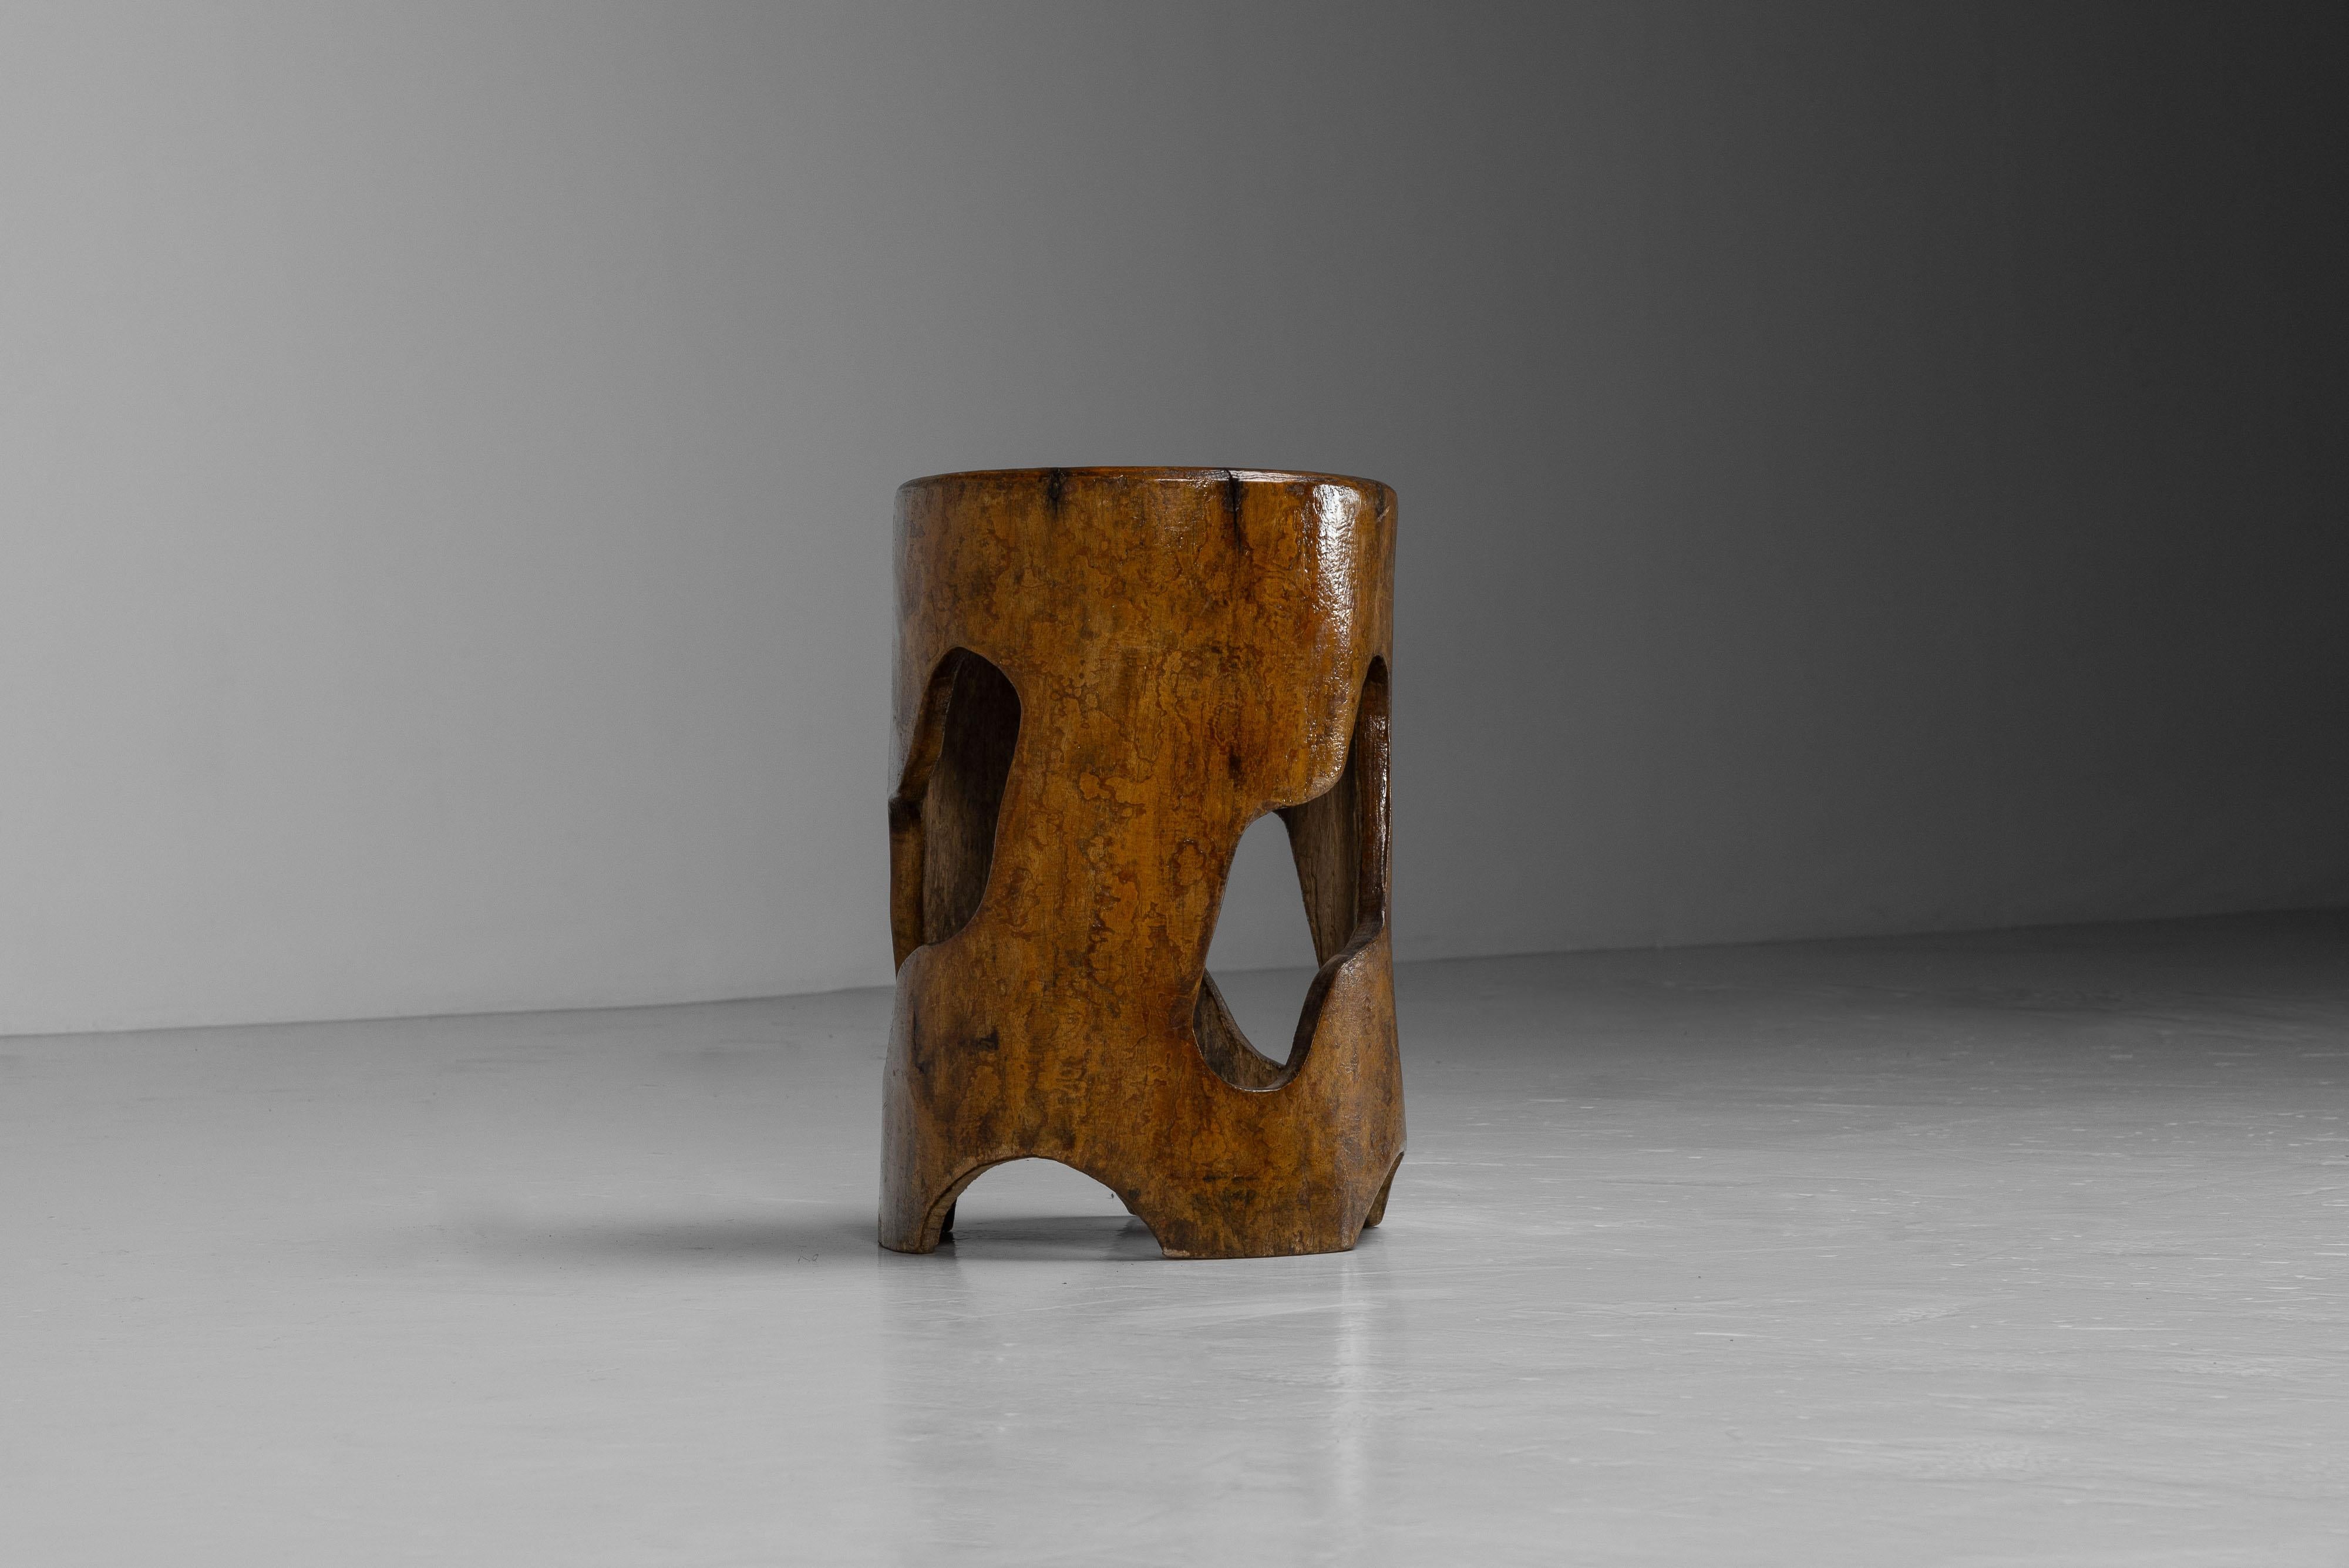 A stool made of a hollow trunk designed by José Zanine Caldas, manufactured in his own workshop in Nova Vicosa, Brazil 1979. Made from a solid hardwood trunk with a stunning original patina. Finished with transparent lacquer. It can also serve as a